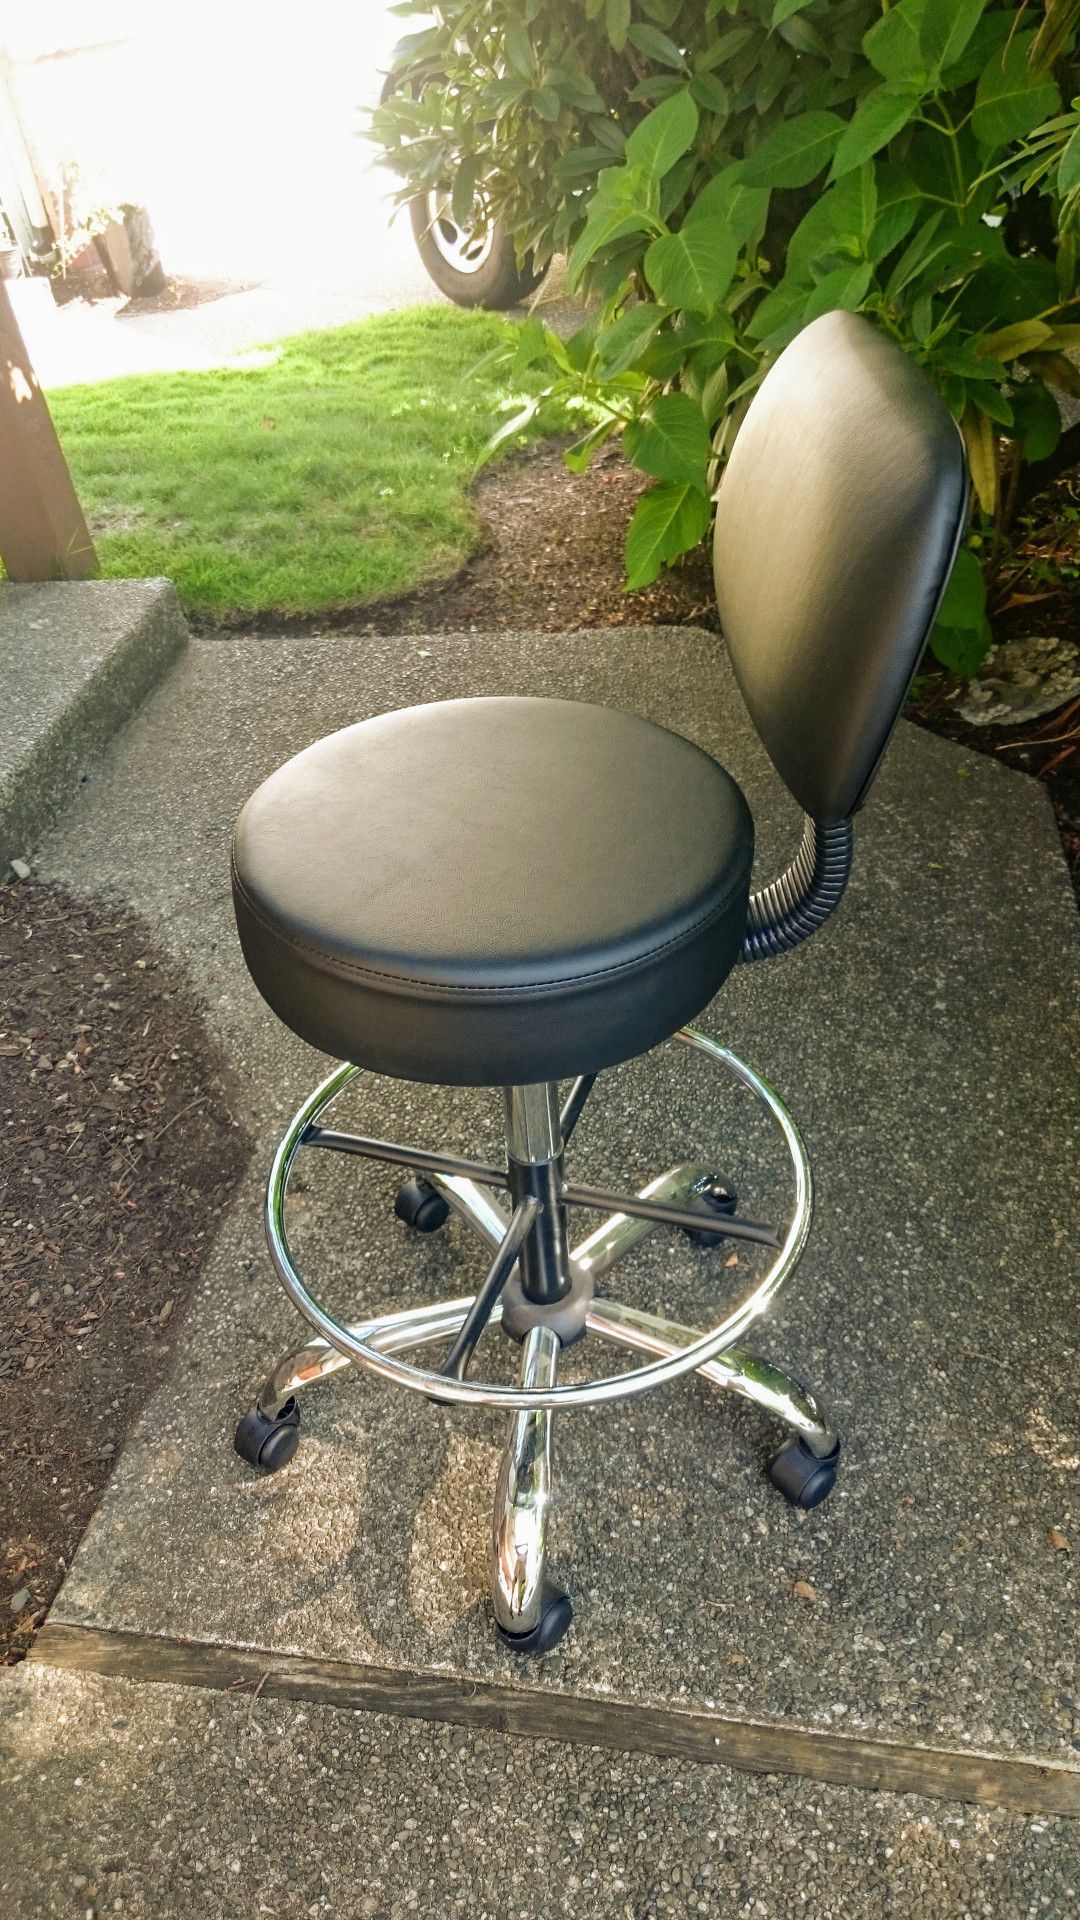 Swivel stool desk chair - pick up only trade for a full bottle of Lysol or generic Lysol